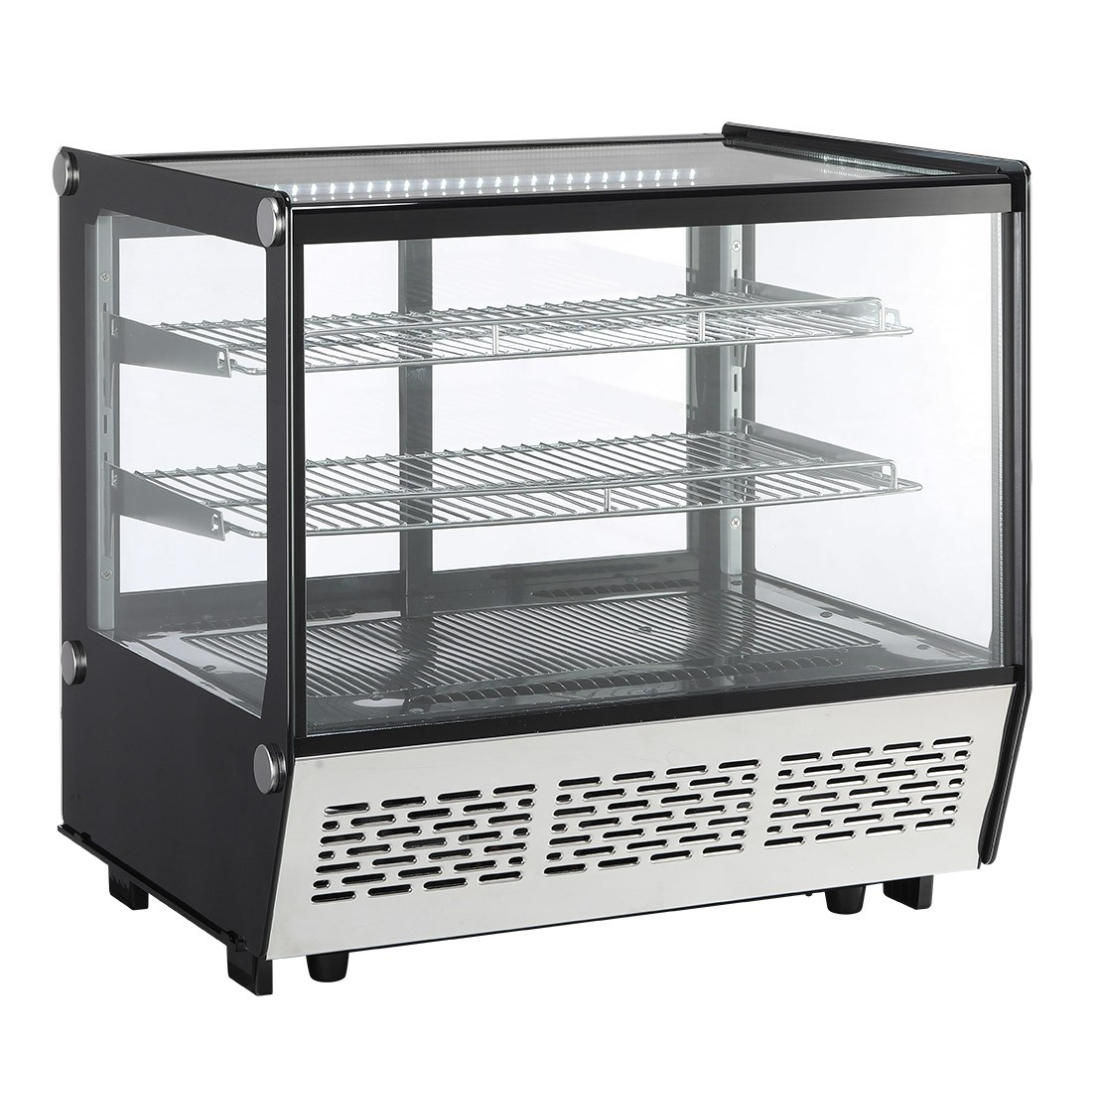 OMAJ XCW-120Z Cake Display Chiller Countertop Straight Glass-70 cm